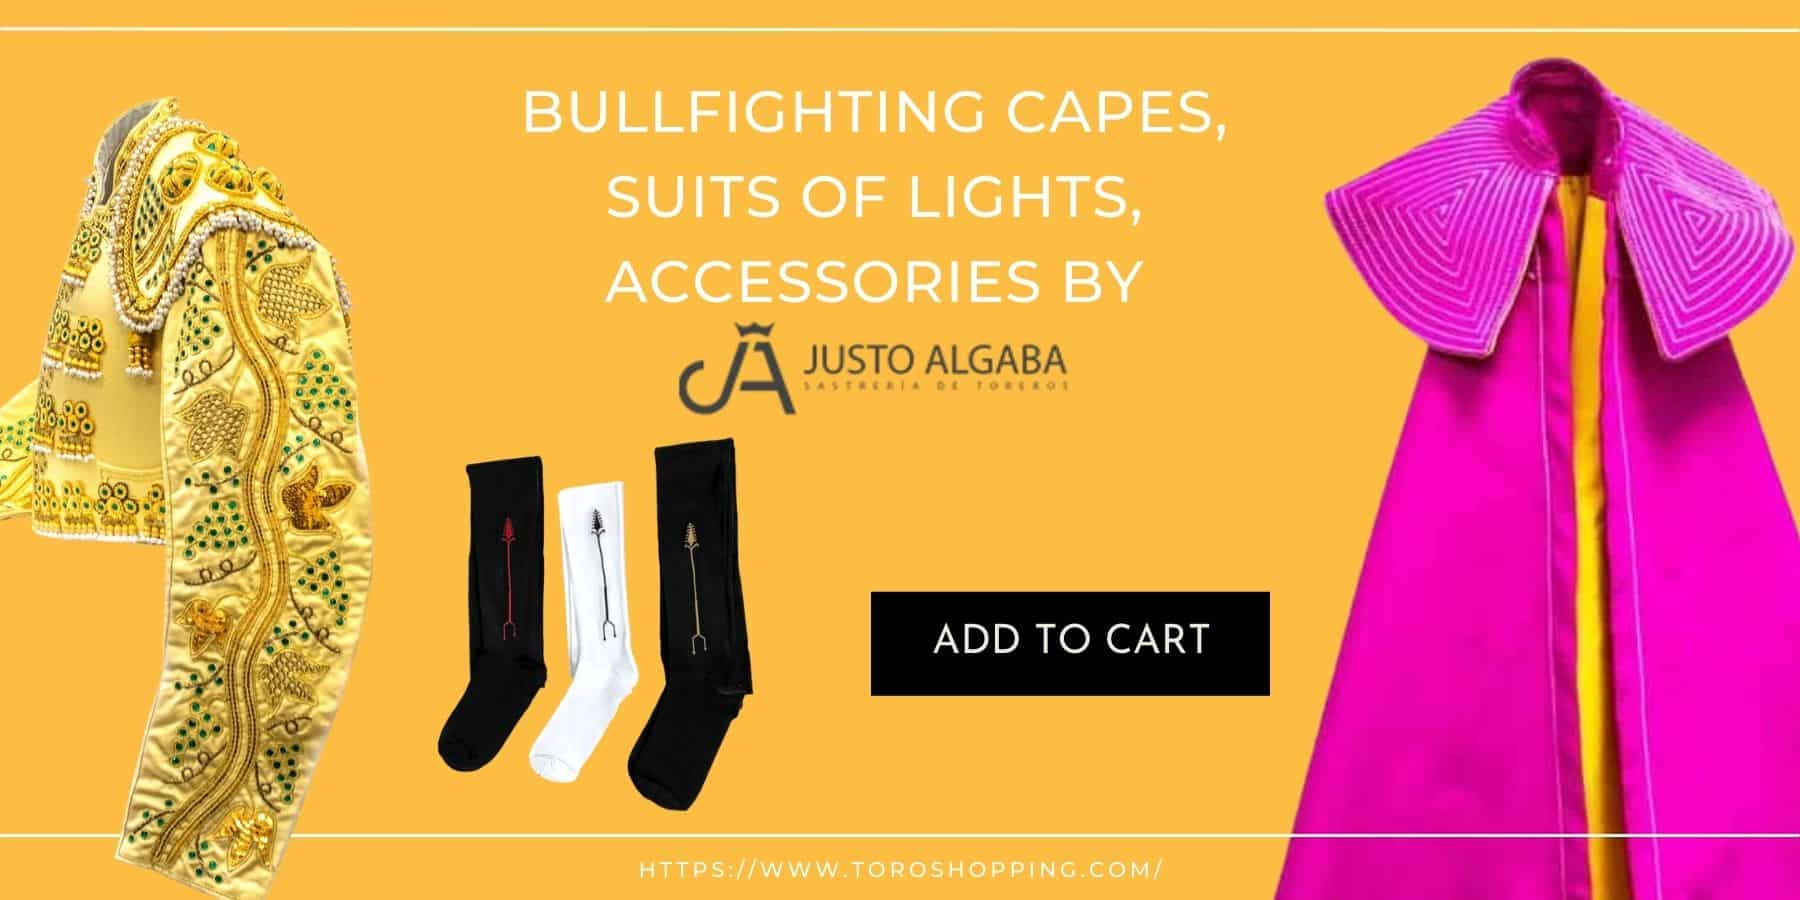 Bullfighting Capes & Accessories